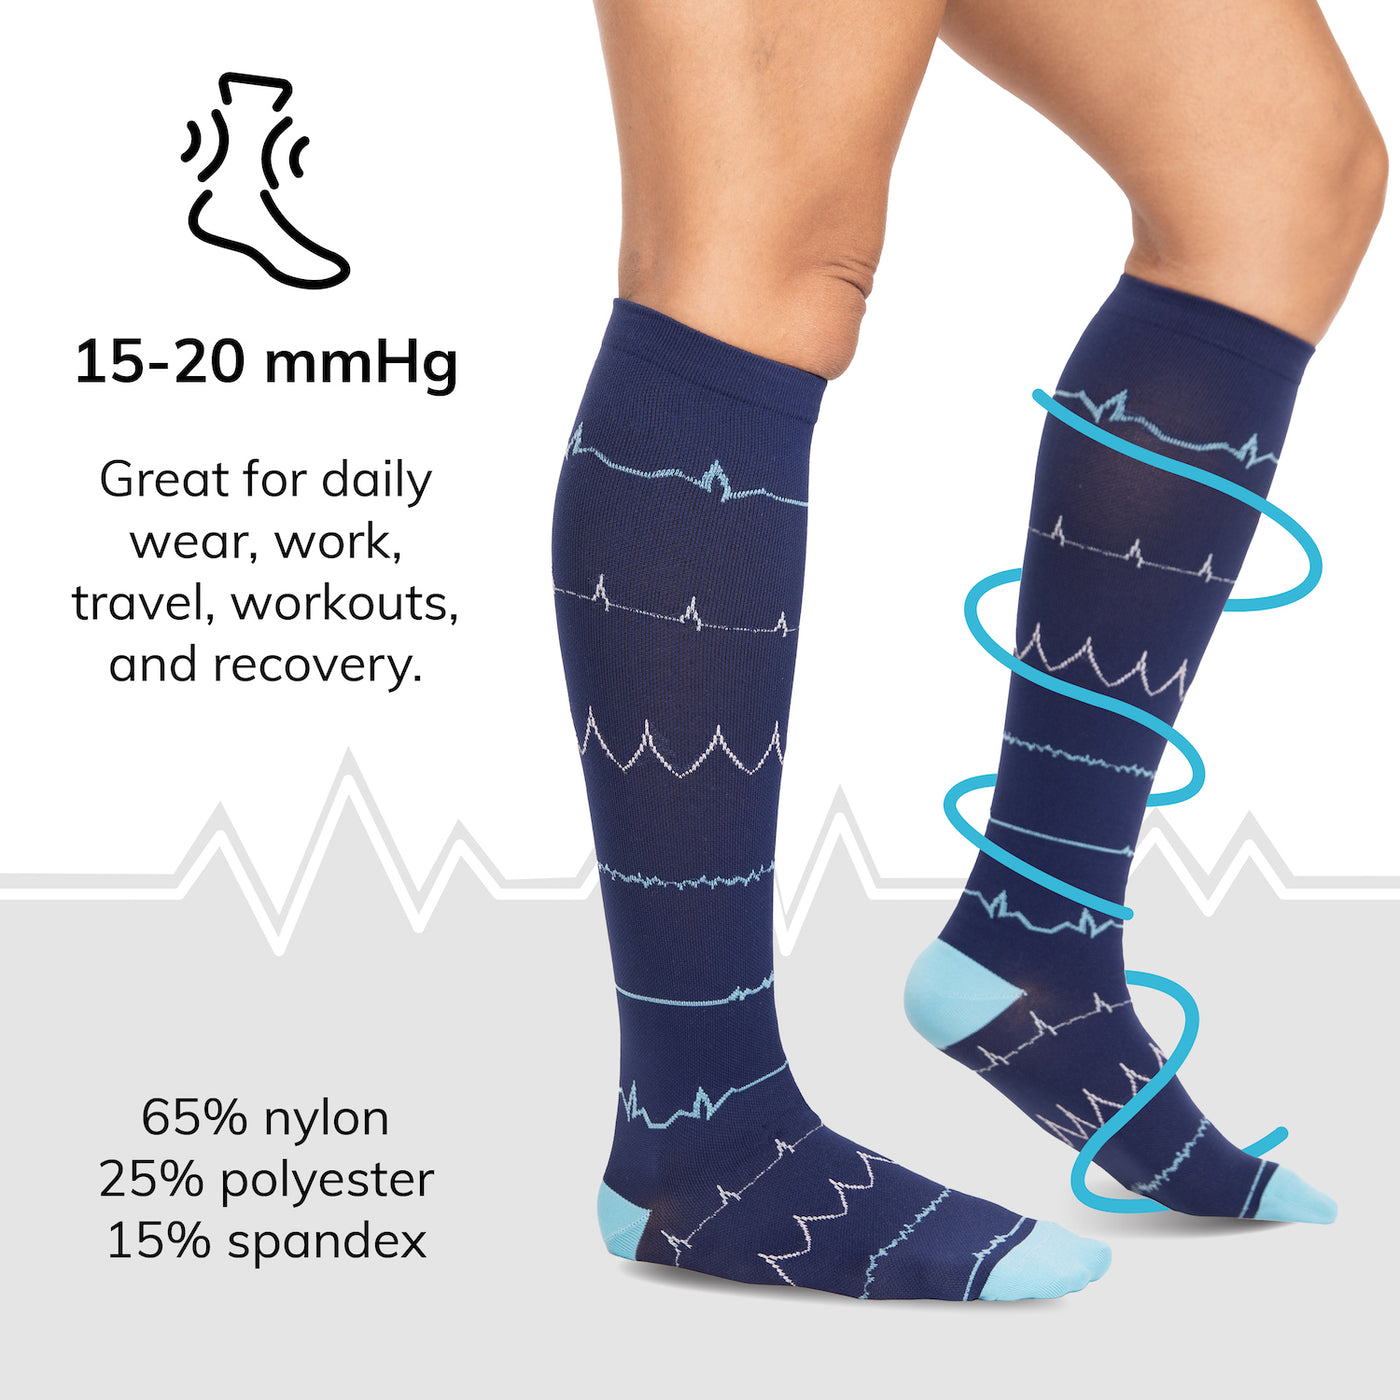 Fun Compression Socks for Nurses | Knee-High Support Stockings